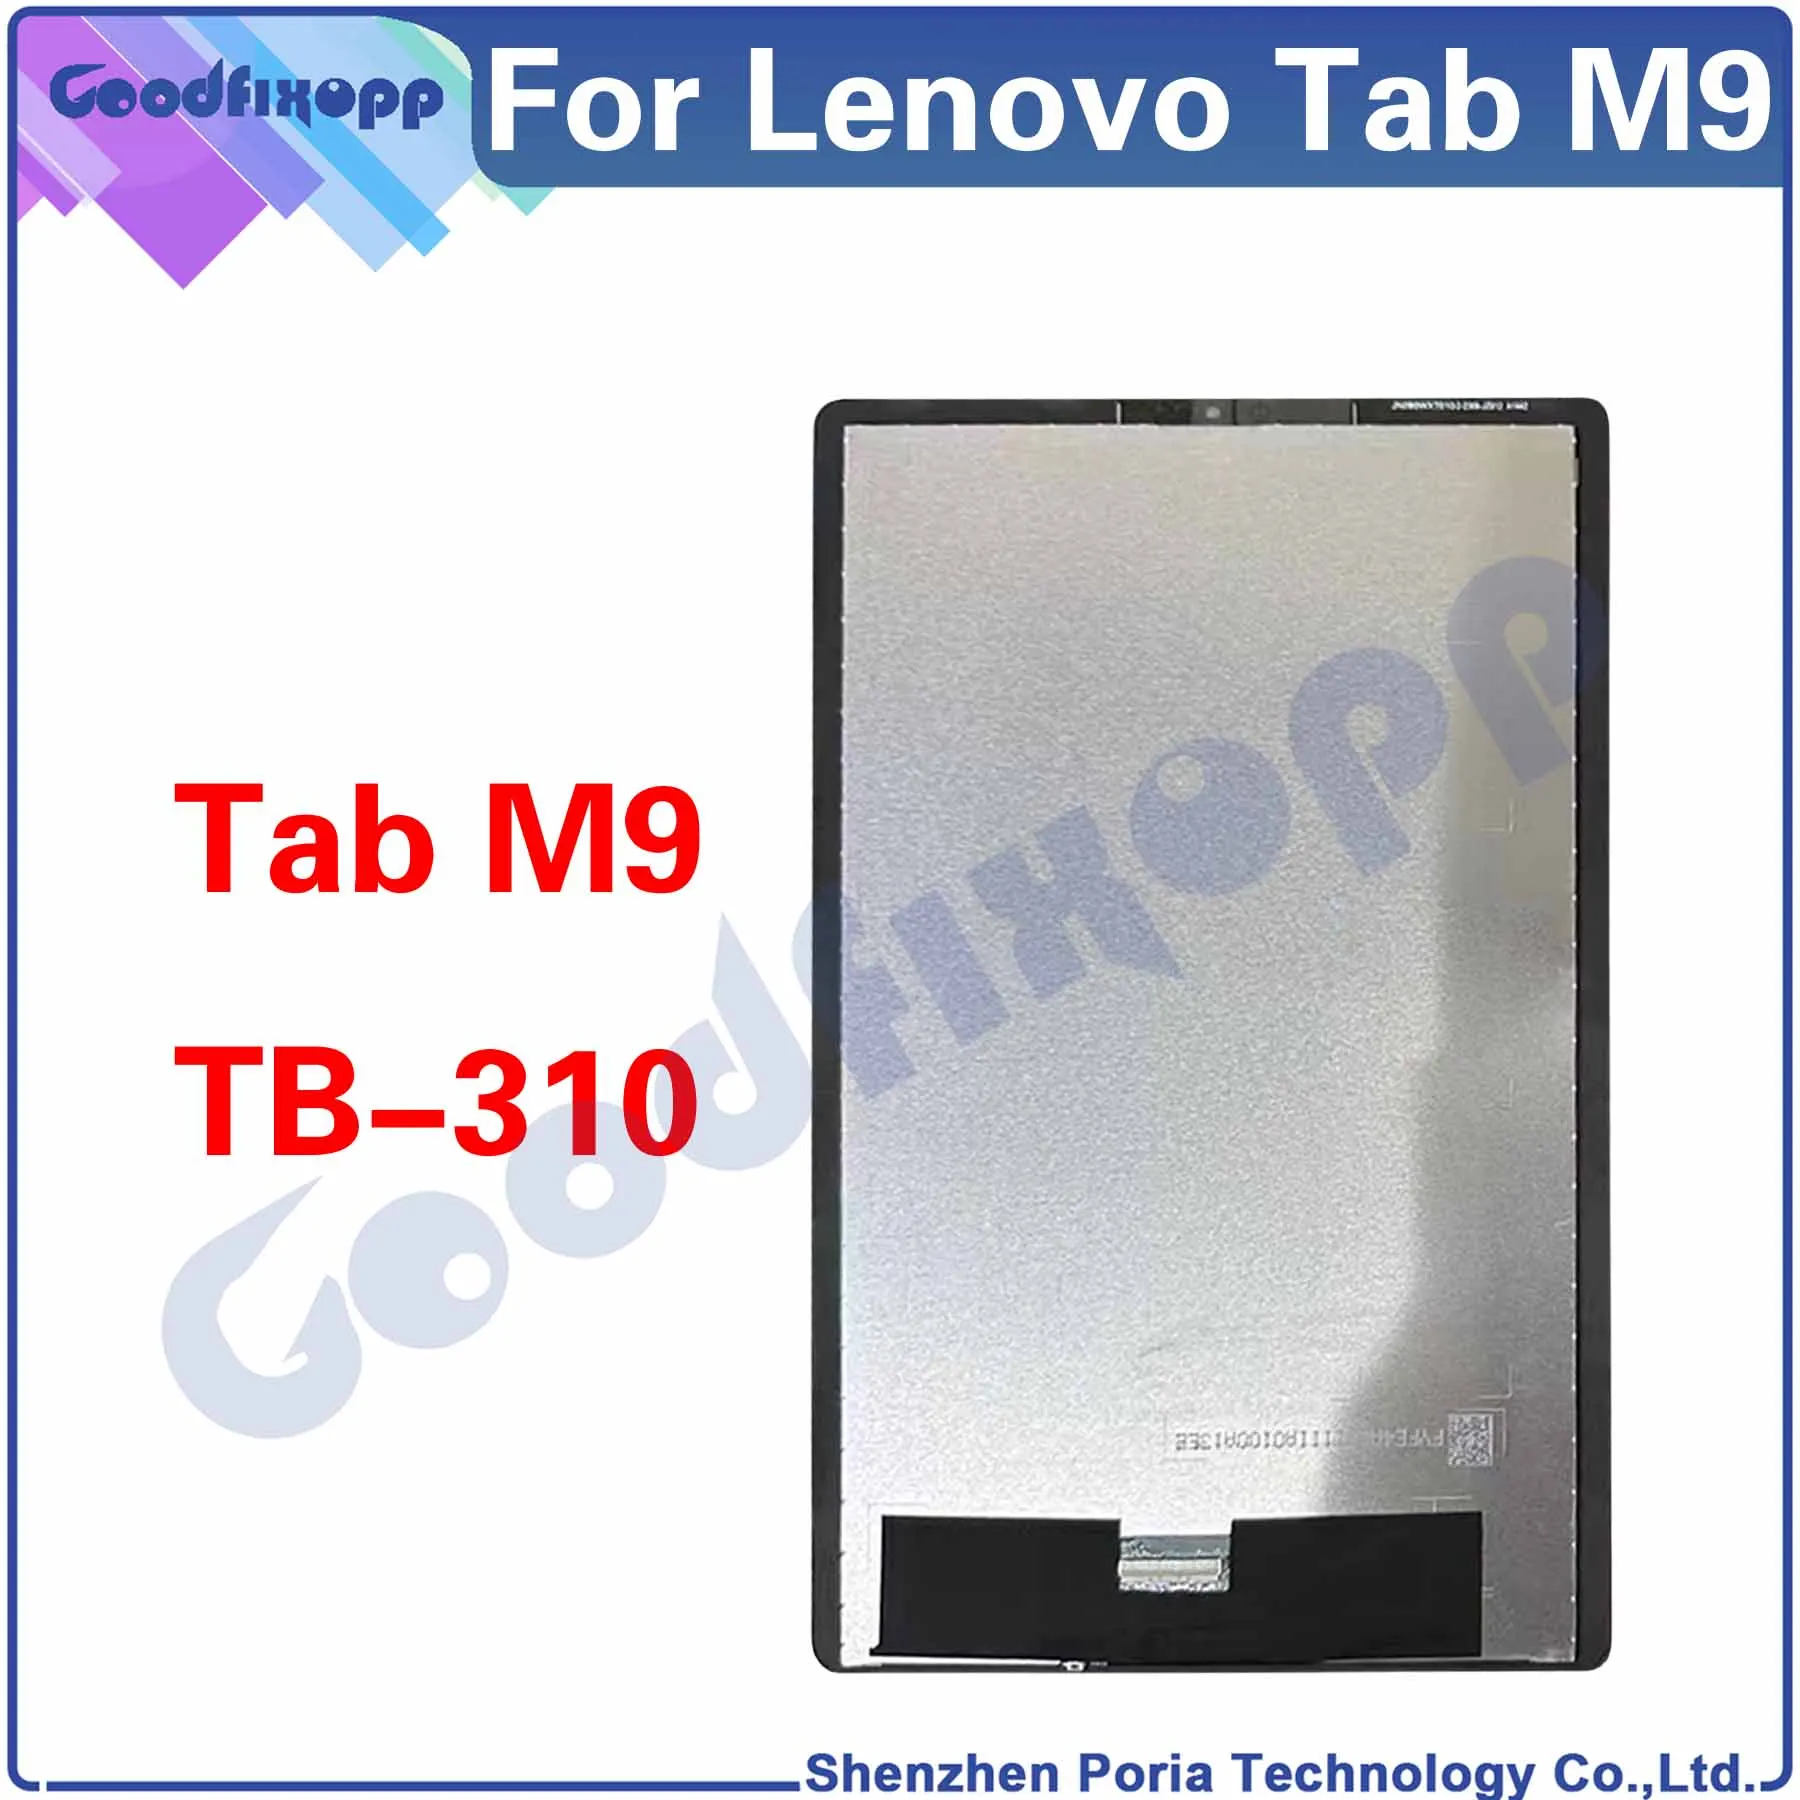 

For Lenovo M9 TB-310 LCD Display Touch Screen Digitizer Assembly Repair Parts Replacement